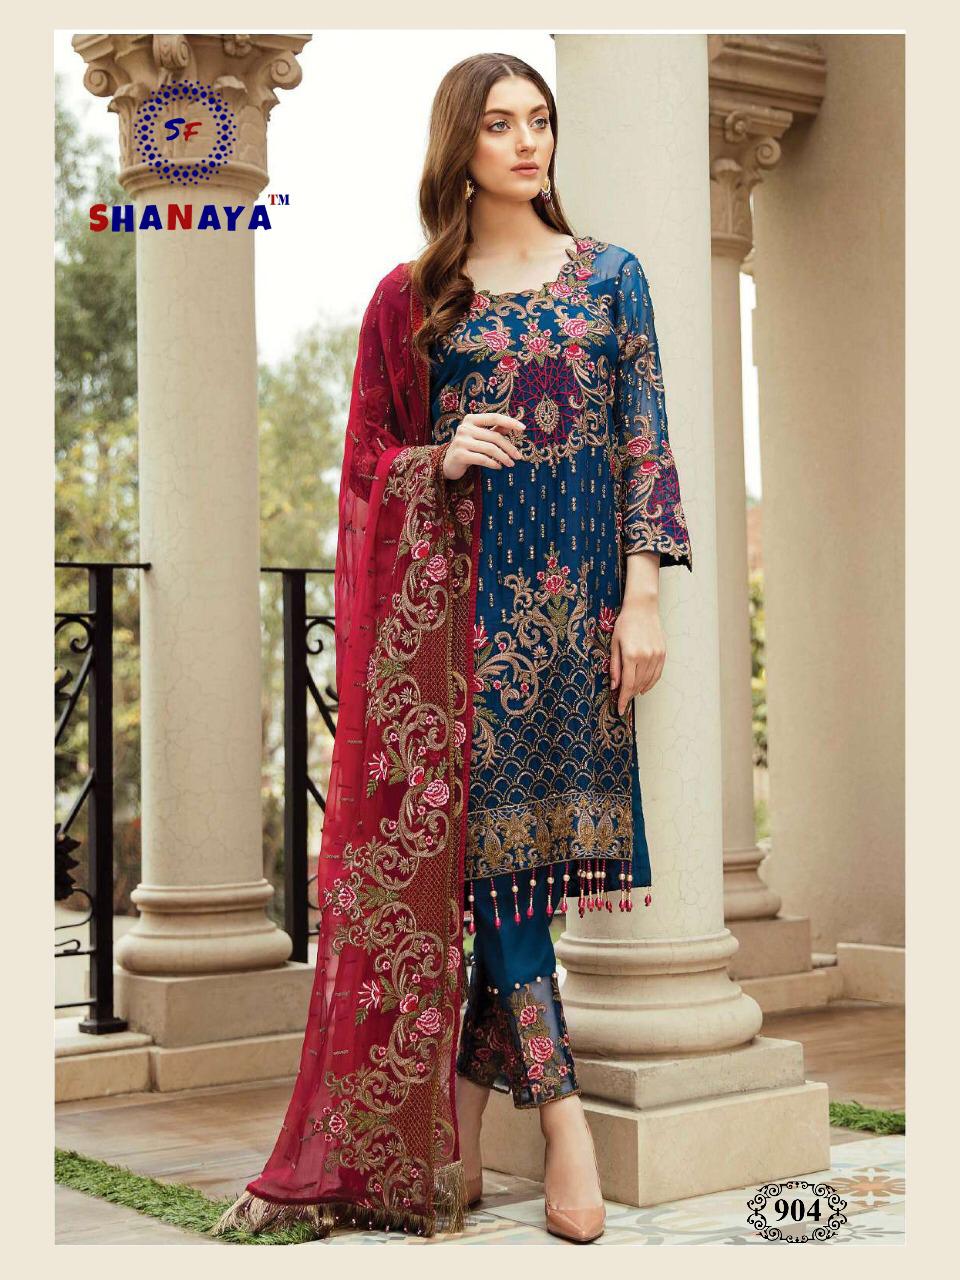 Shanaya Designer Partywear Suits Ready Stock In Singles And Multiple